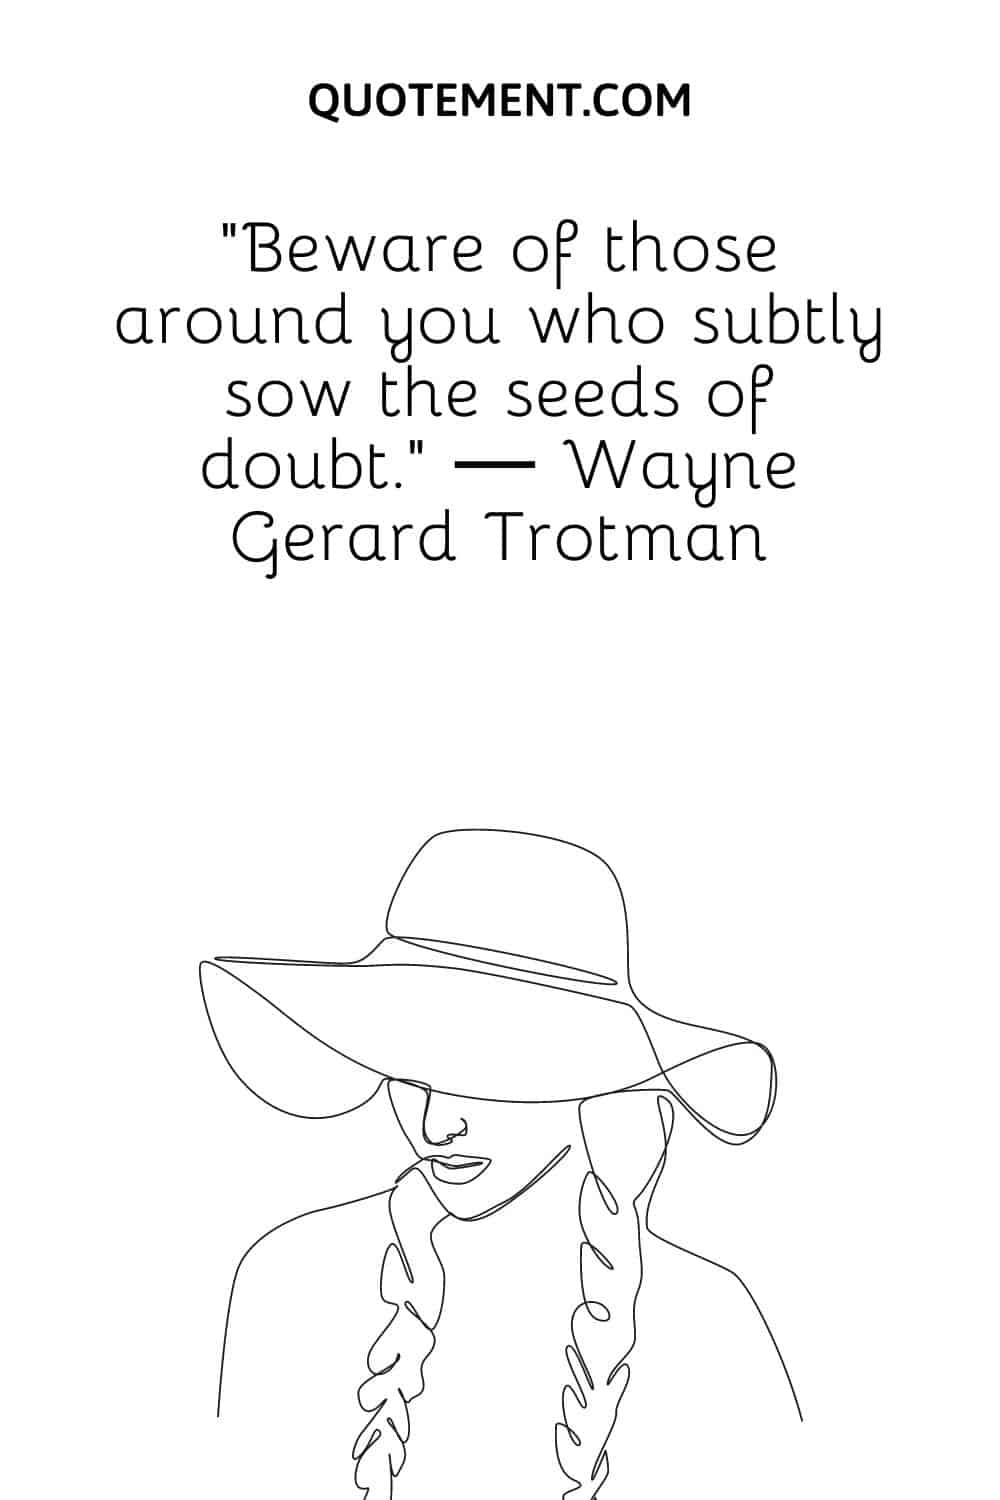 Beware of those around you who subtly sow the seeds of doubt